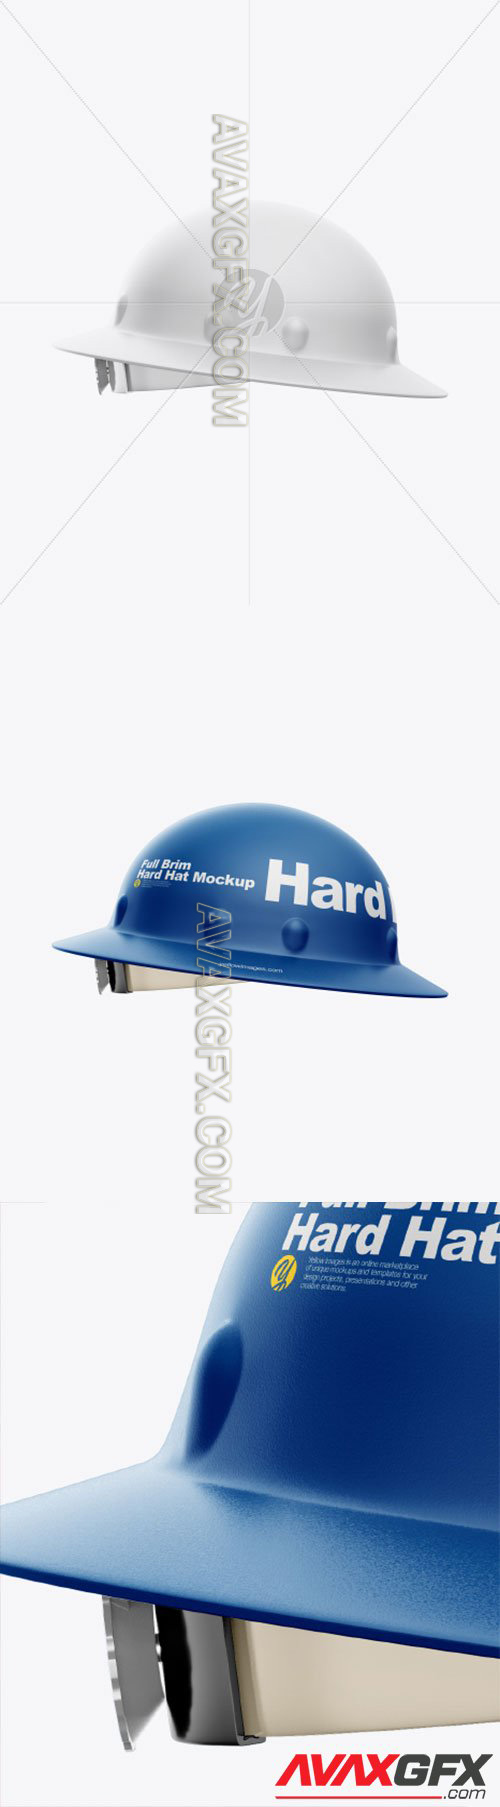 Download Full Brim Hard Hat Mockup - Side View 28334 » AVAXGFX - All Downloads that You Need in One Place ...